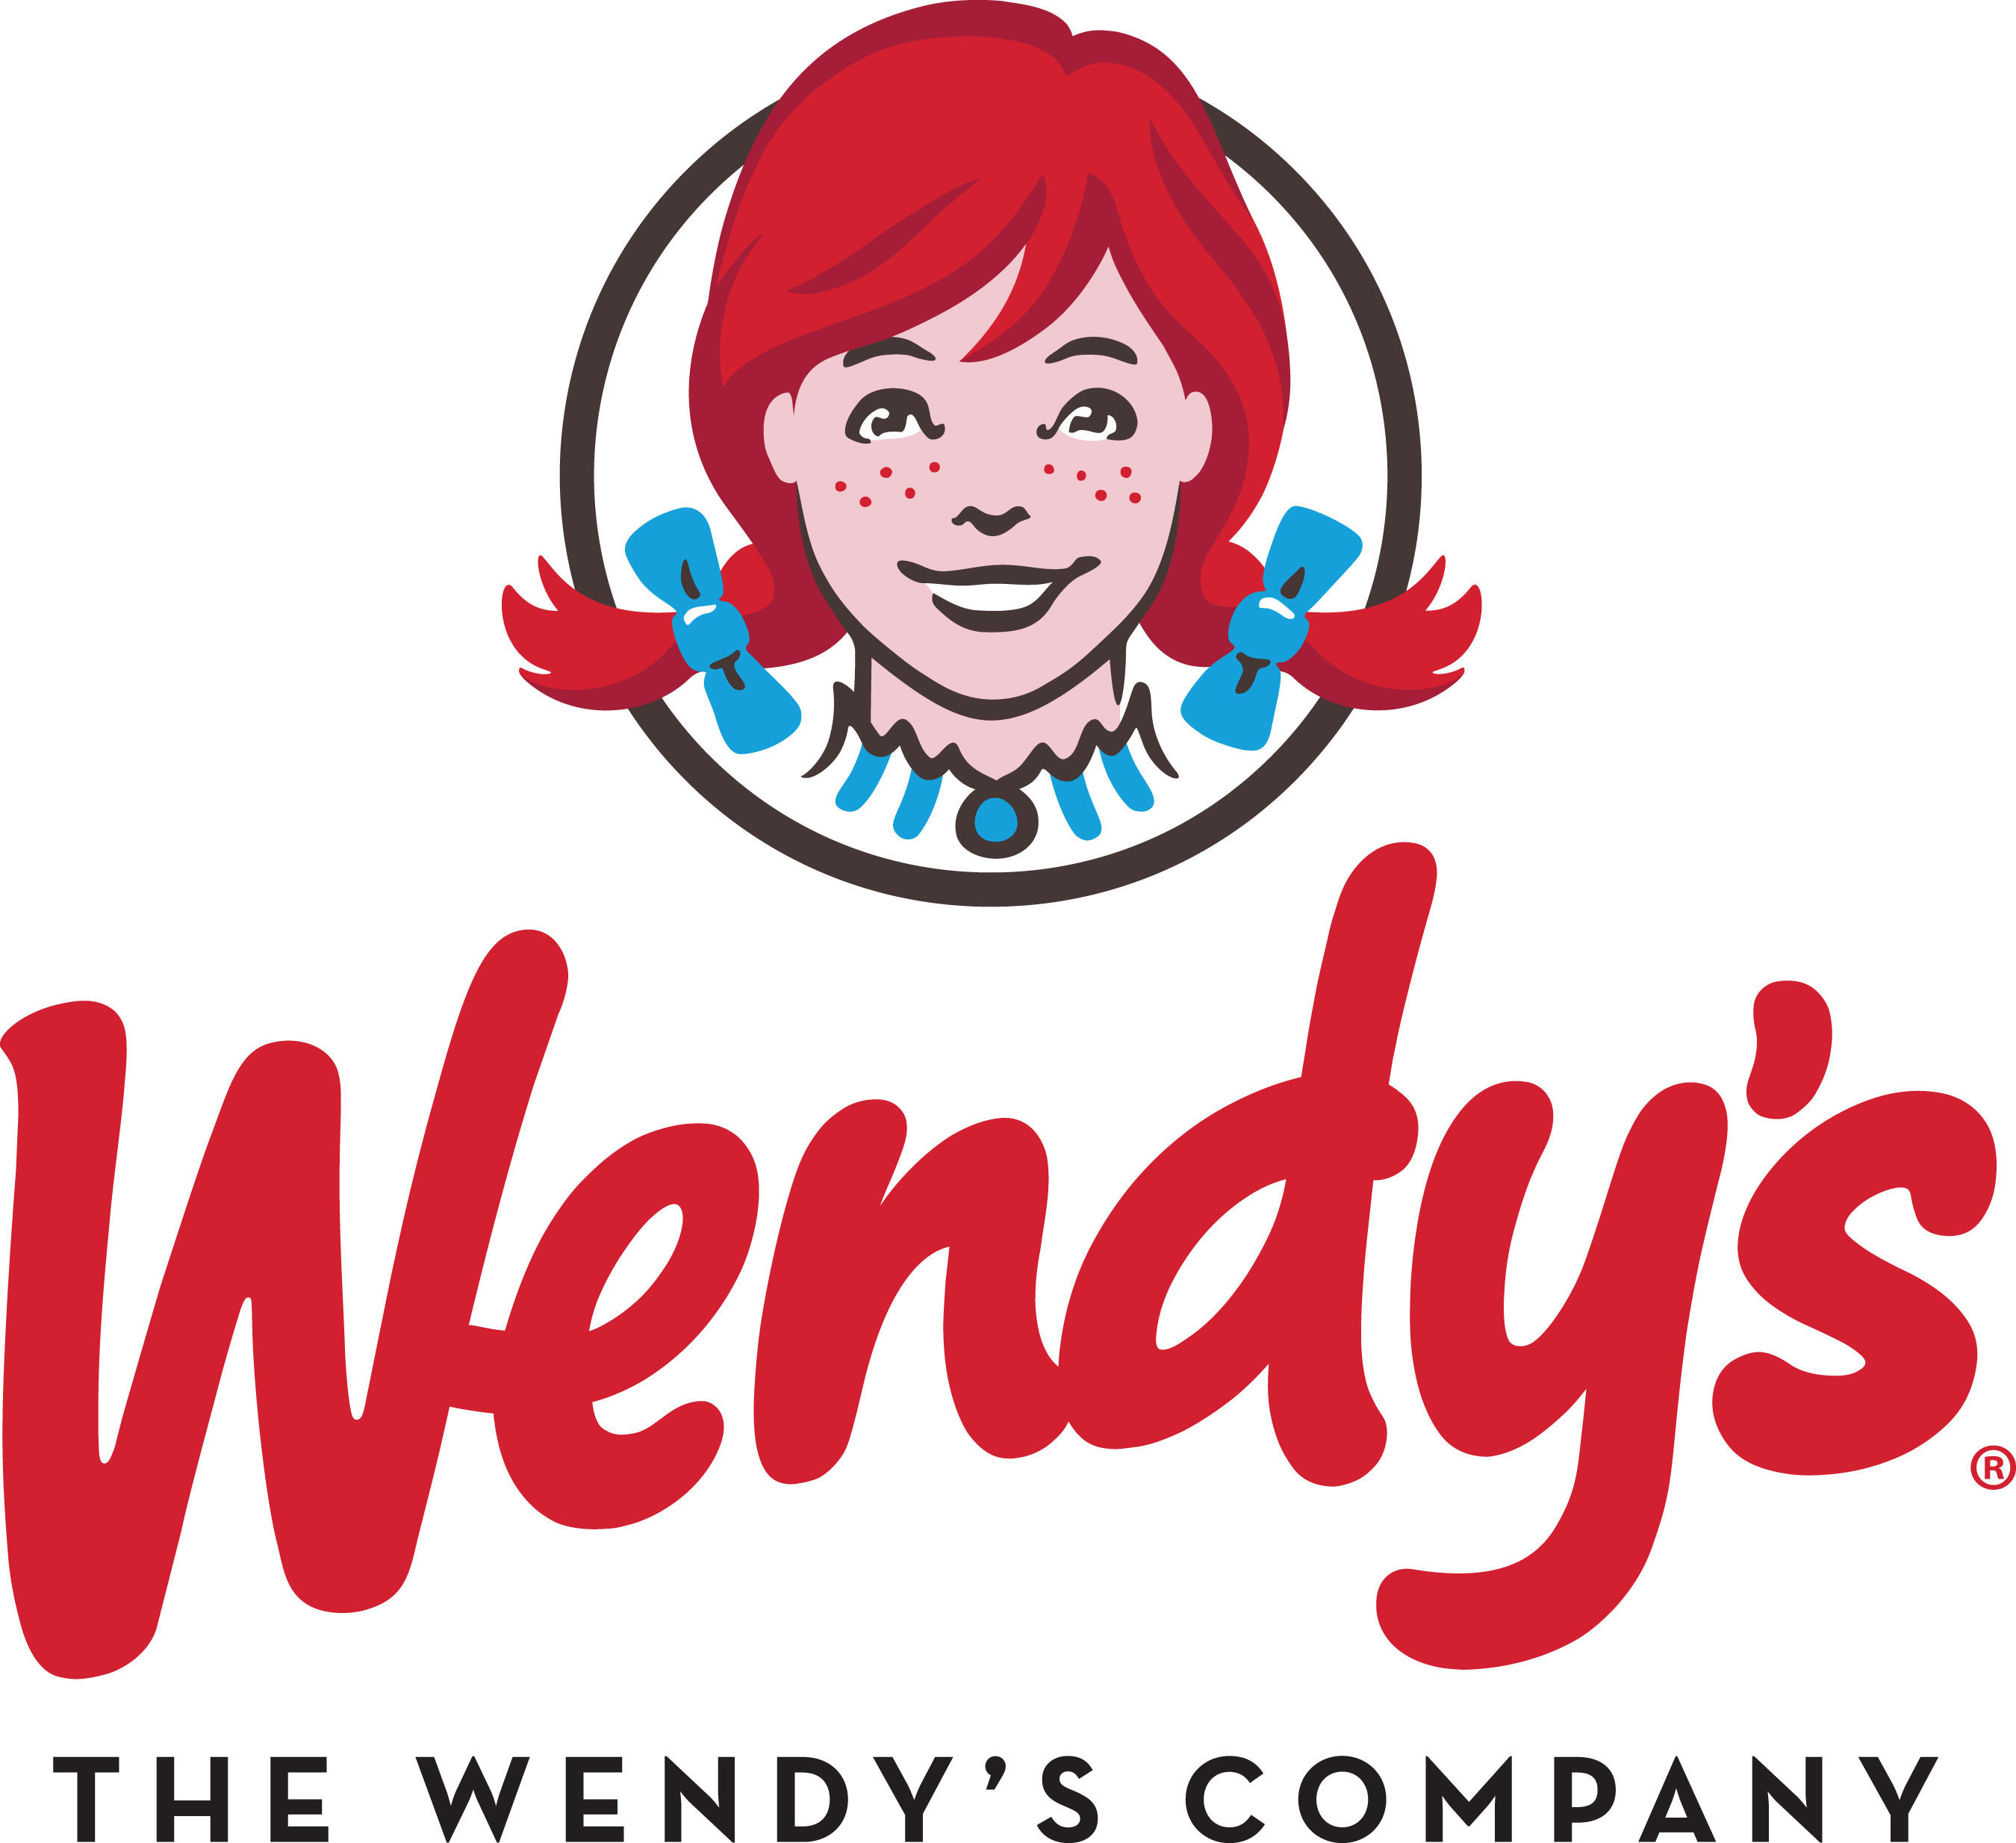 The Wendyâeuro(TM)s Company is the world's third-largest quick-service hamburger company. The Wendyâeuro(TM)s system includes approximately 6,500 franchise and Company-operated restaurants in the United States and 28 countries and U.S. territories worldwide. For more information, visit  www.aboutwendys.com . (PRNewsFoto/The Wendy's Company)